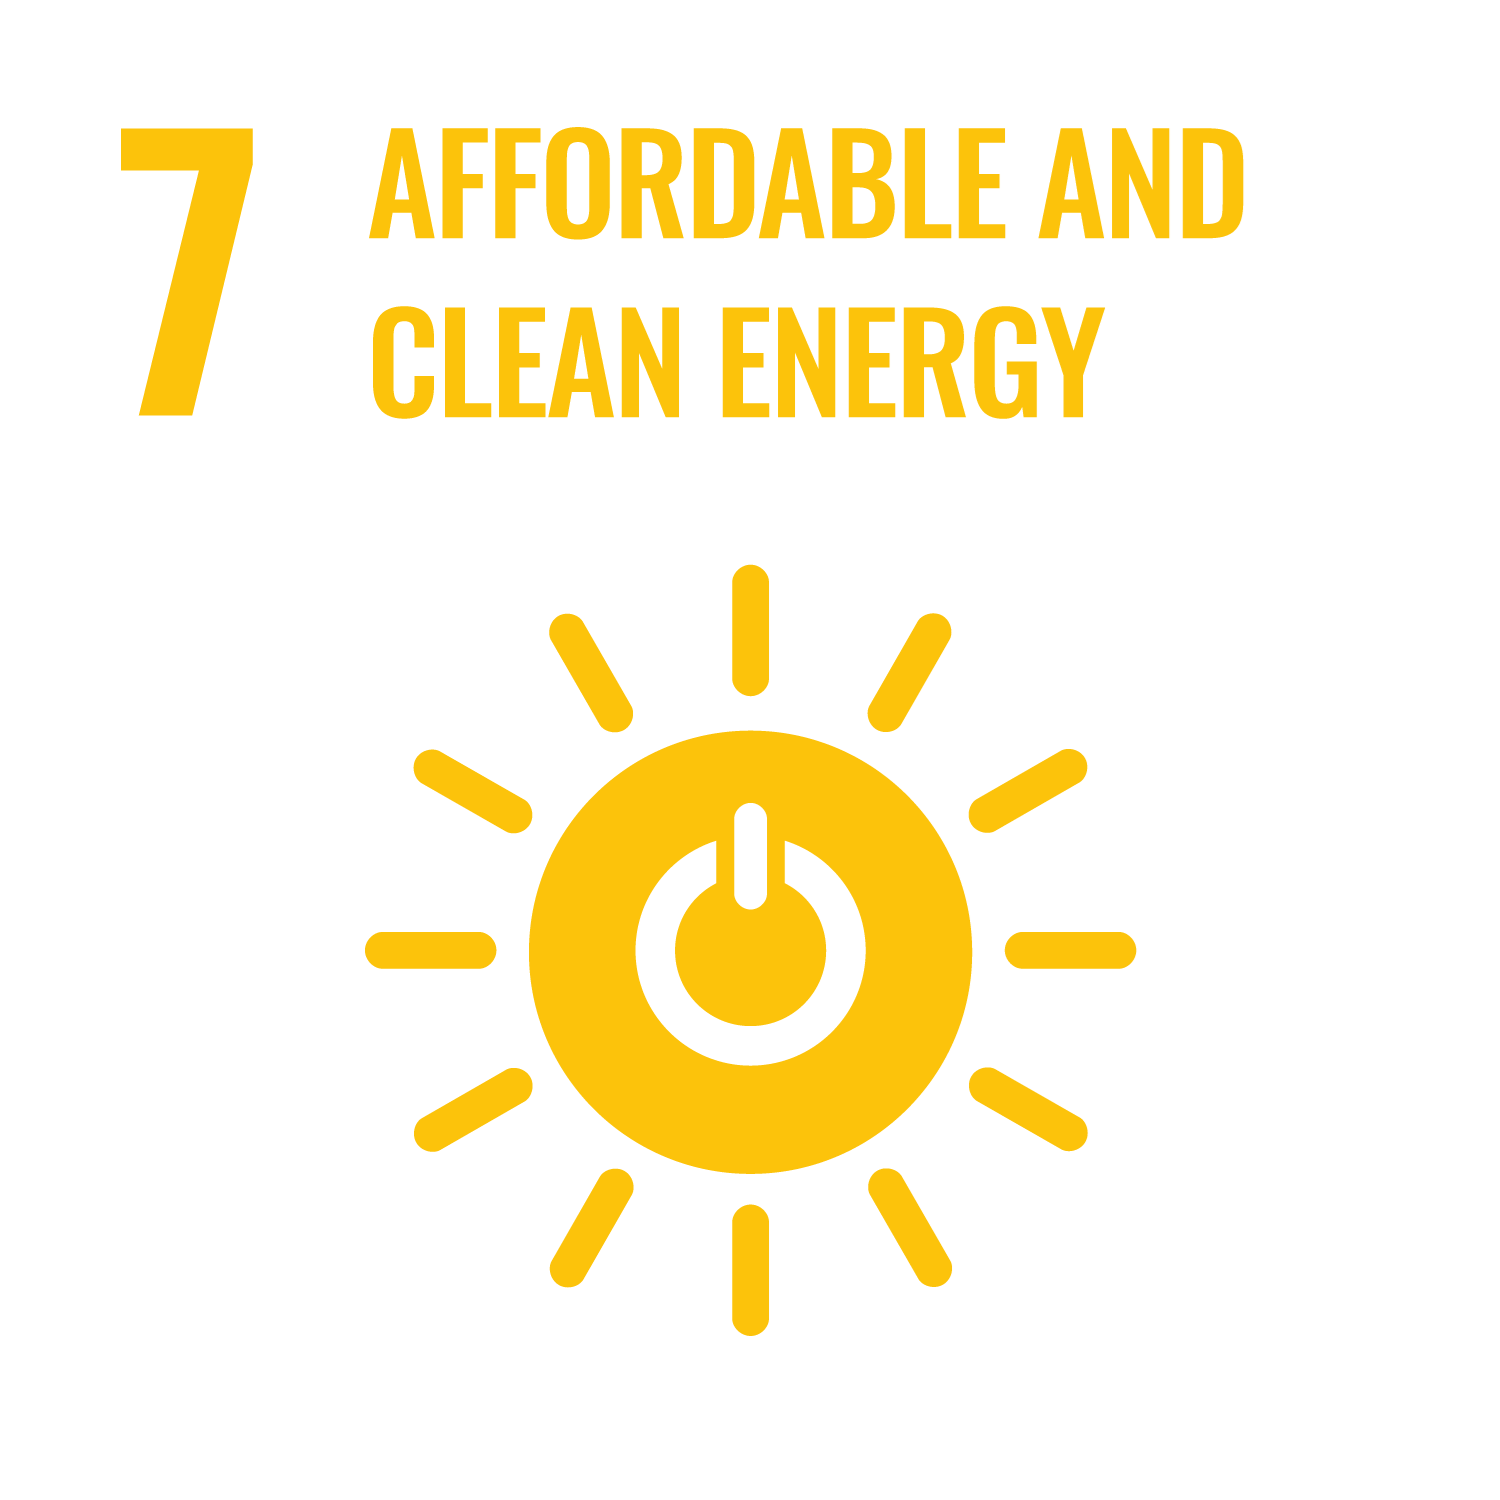 SDG Goal 7: Affordable and clean energy